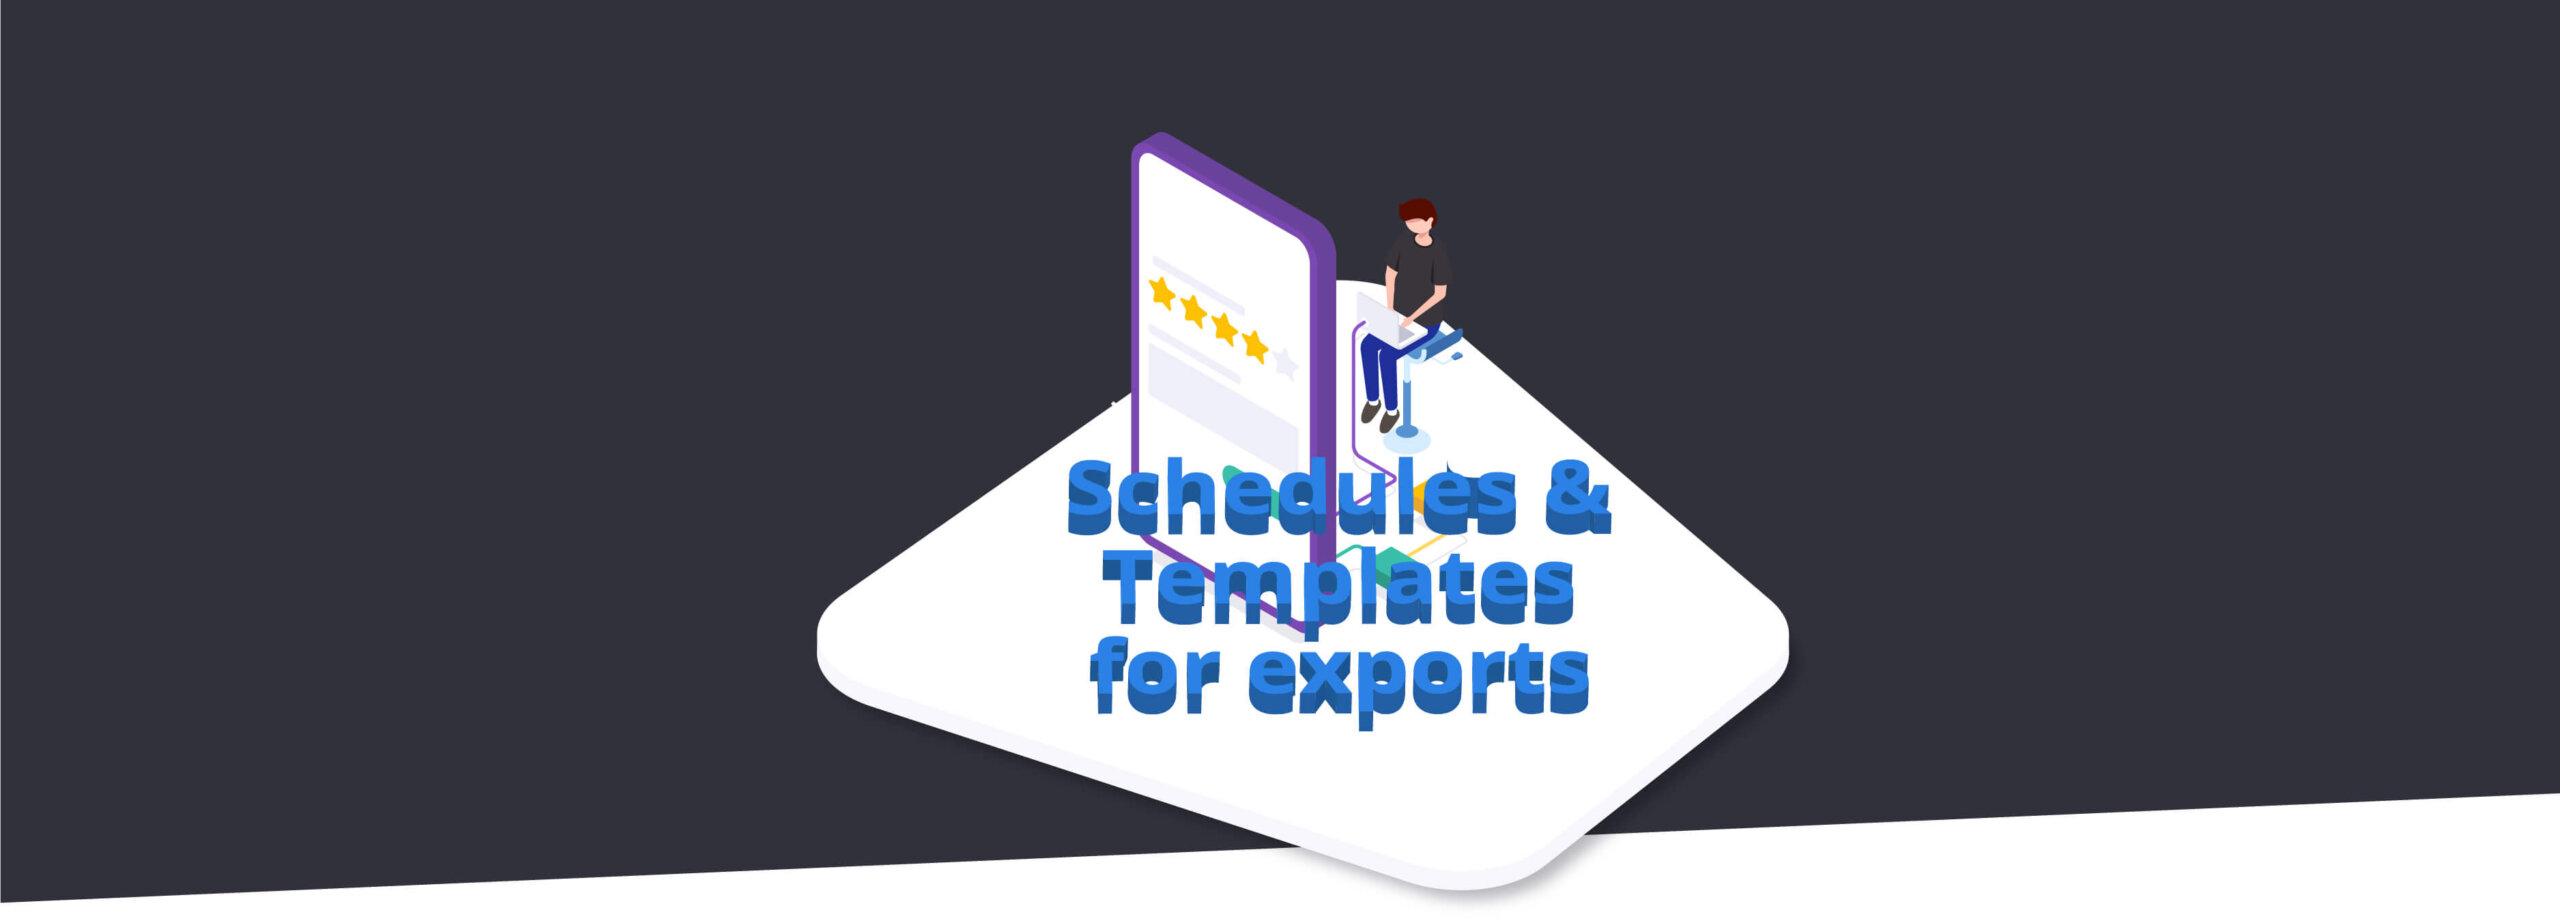 Schedules & Templates for Exports Are Live!